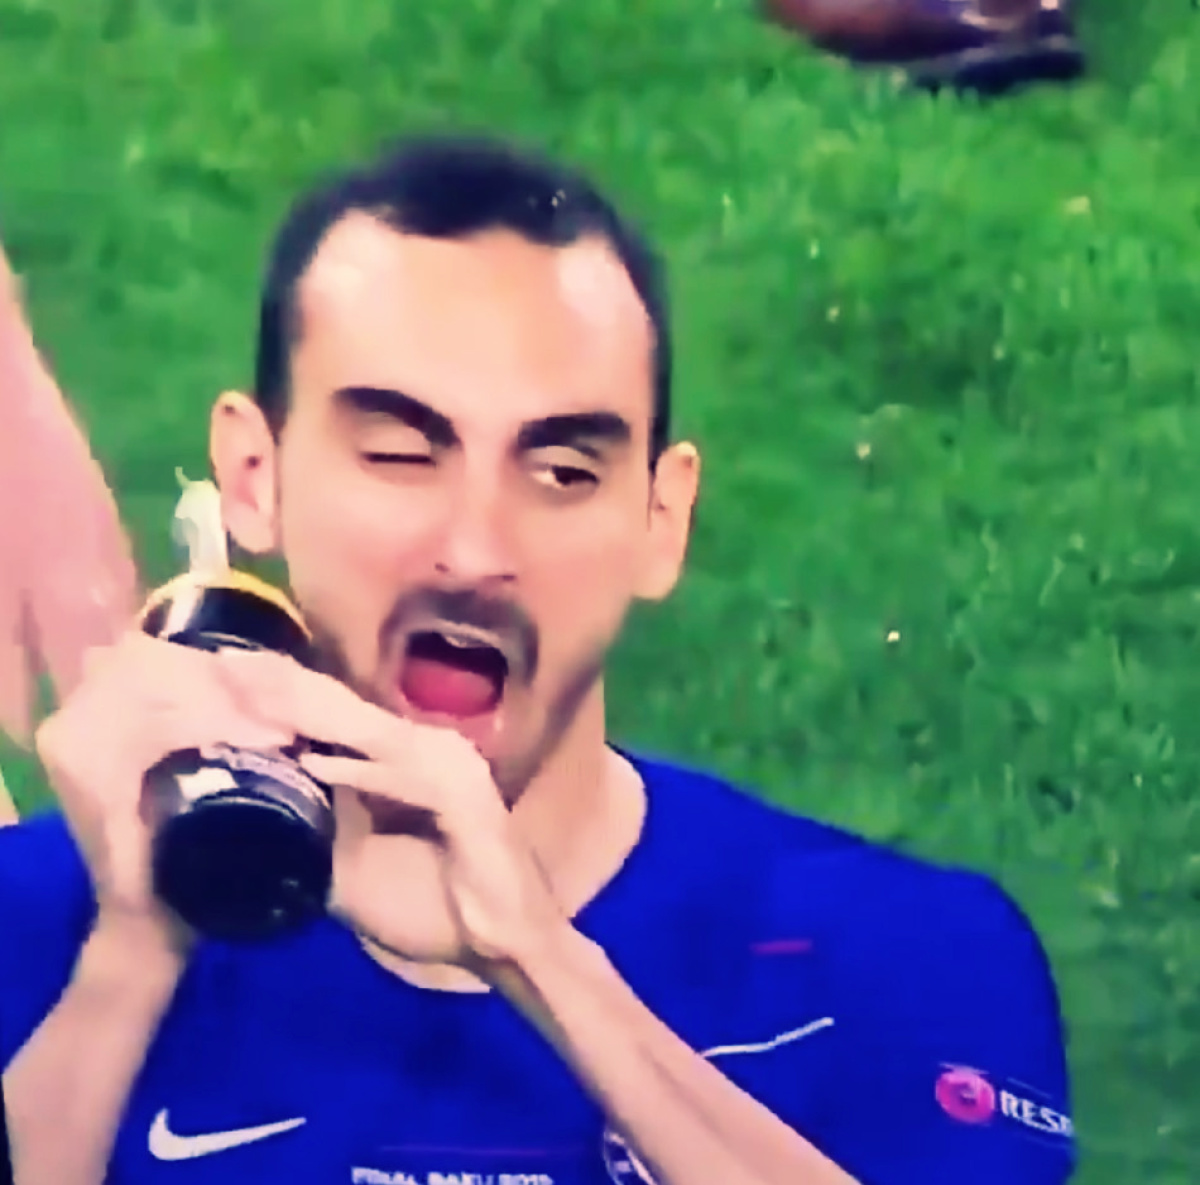 Zappacosta forgetting where his mouth is in one of the highlights of the Chelsea win last night